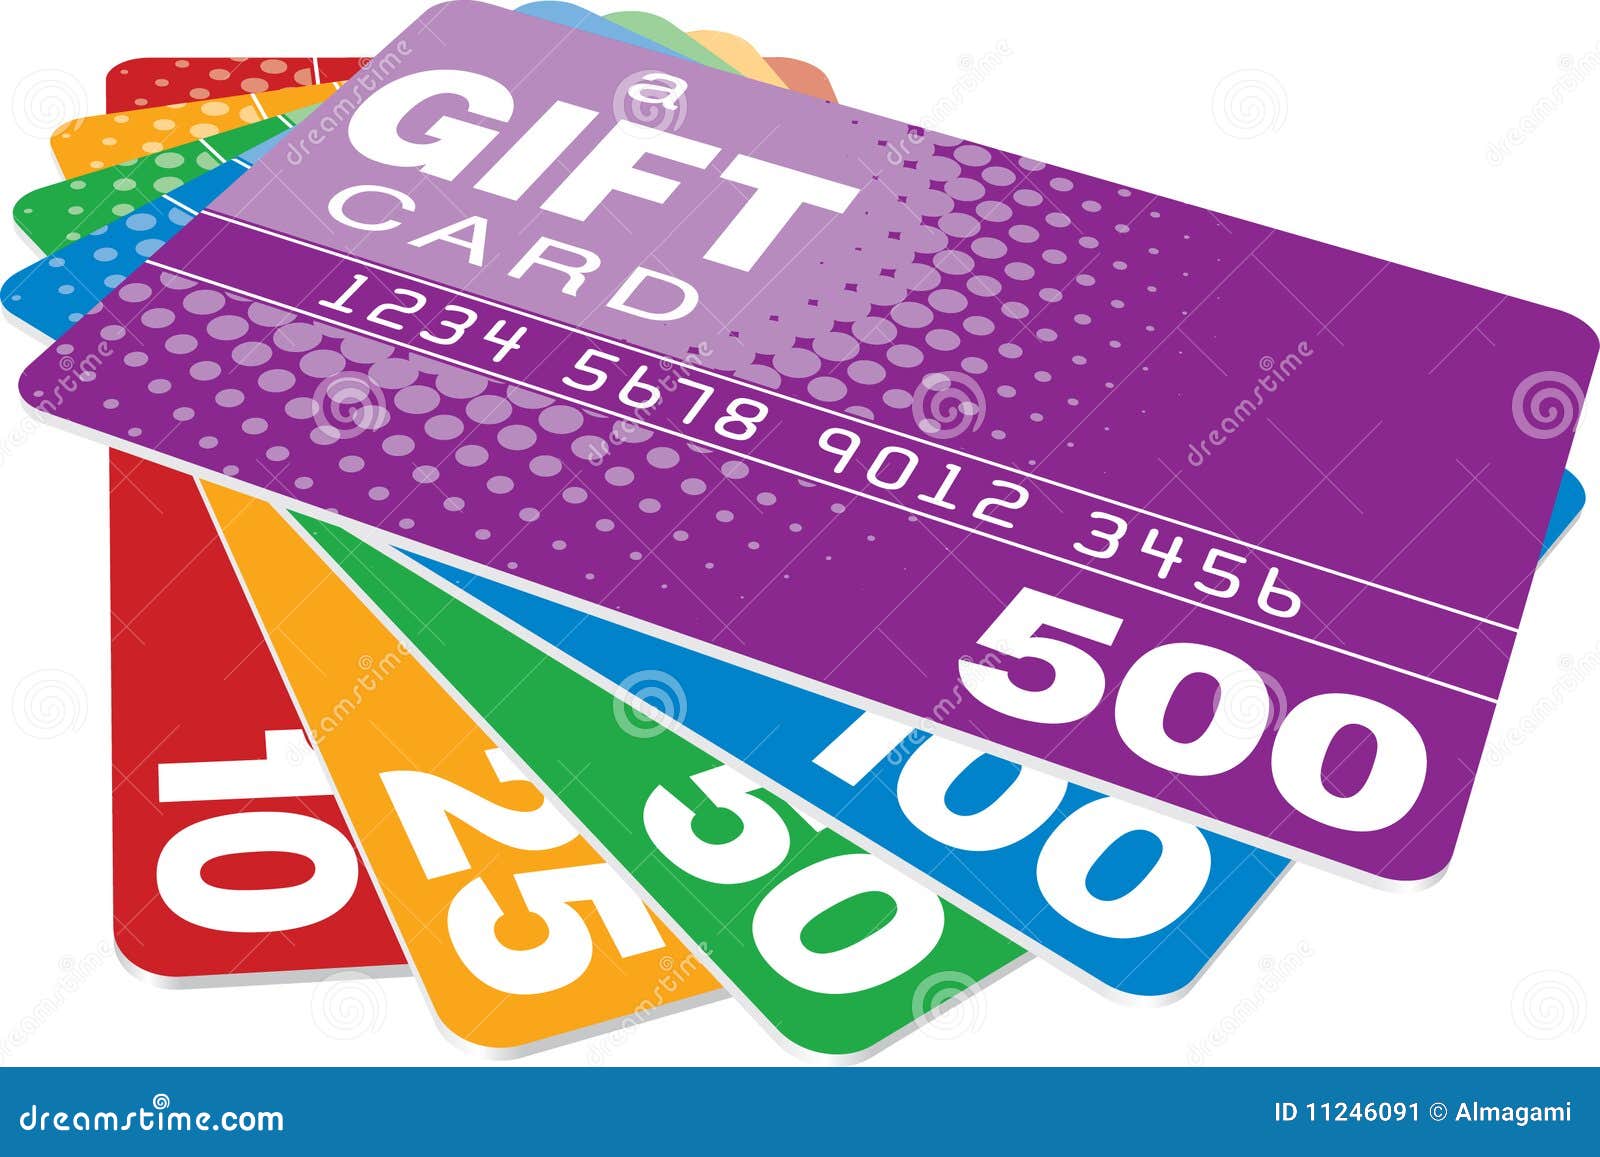 Gift Cards Stock Image - Image: 11246091